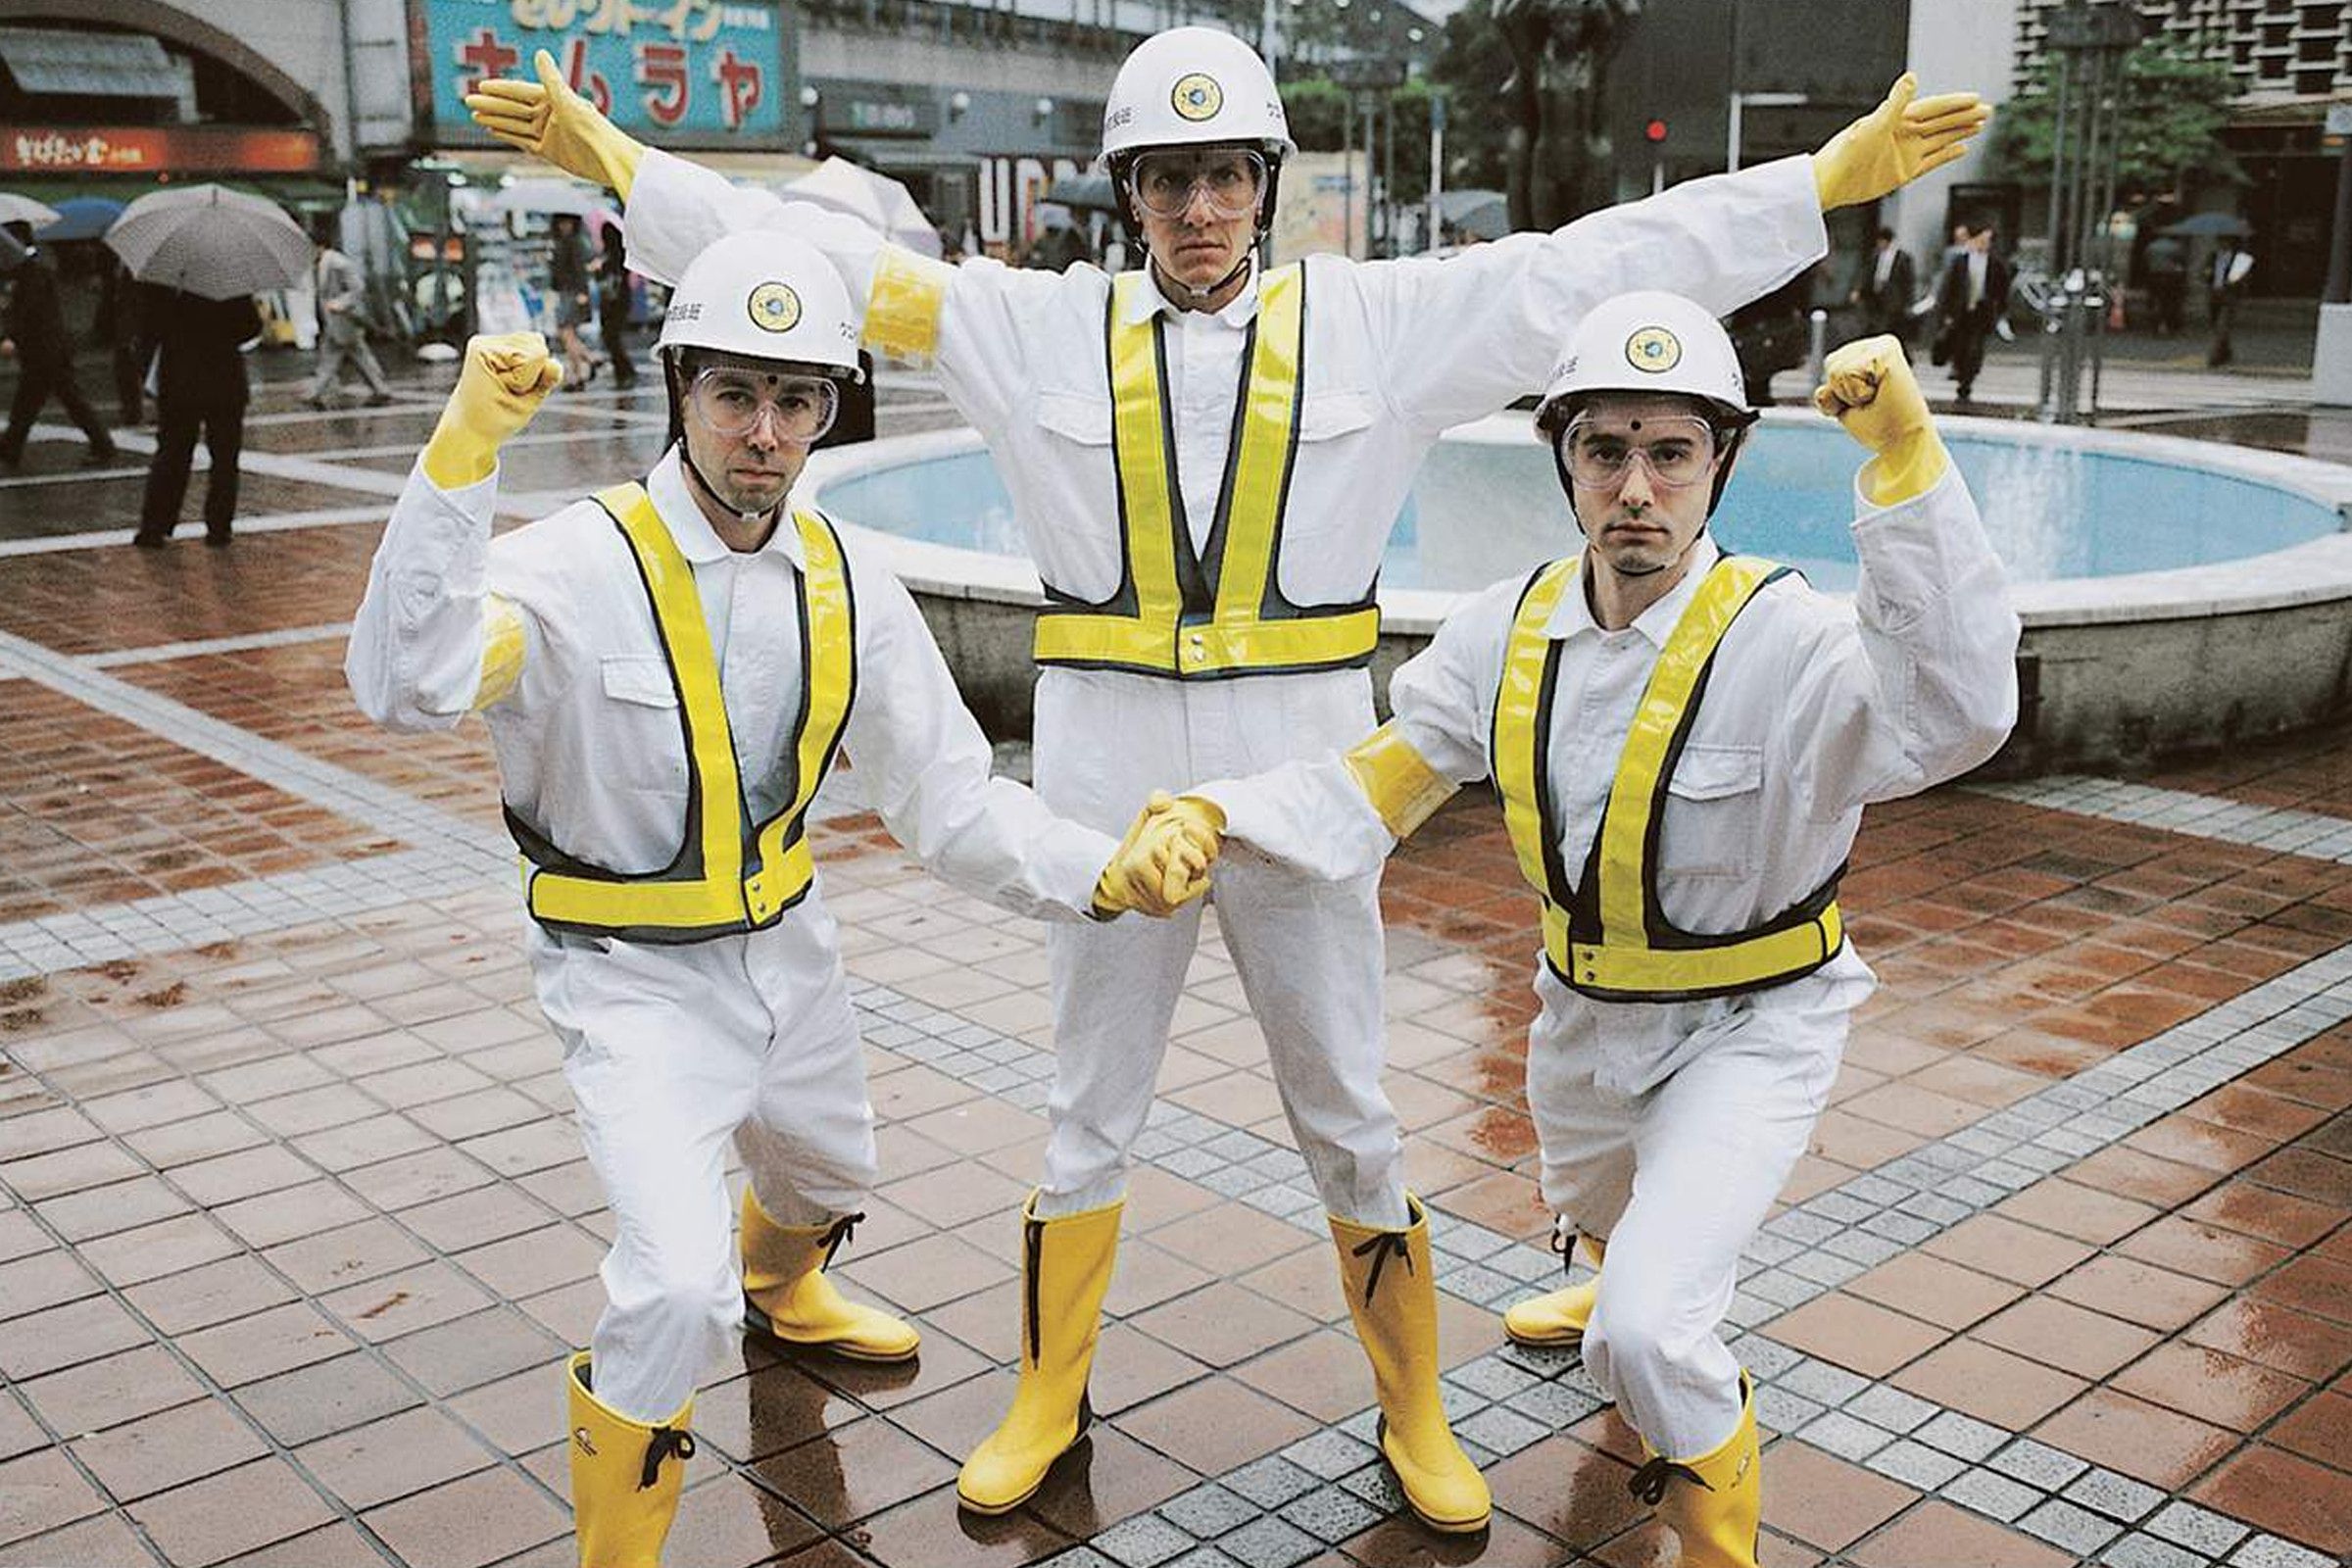 The Beastie Boys in Tokyo filming the video for "Intergalactic" in 1998